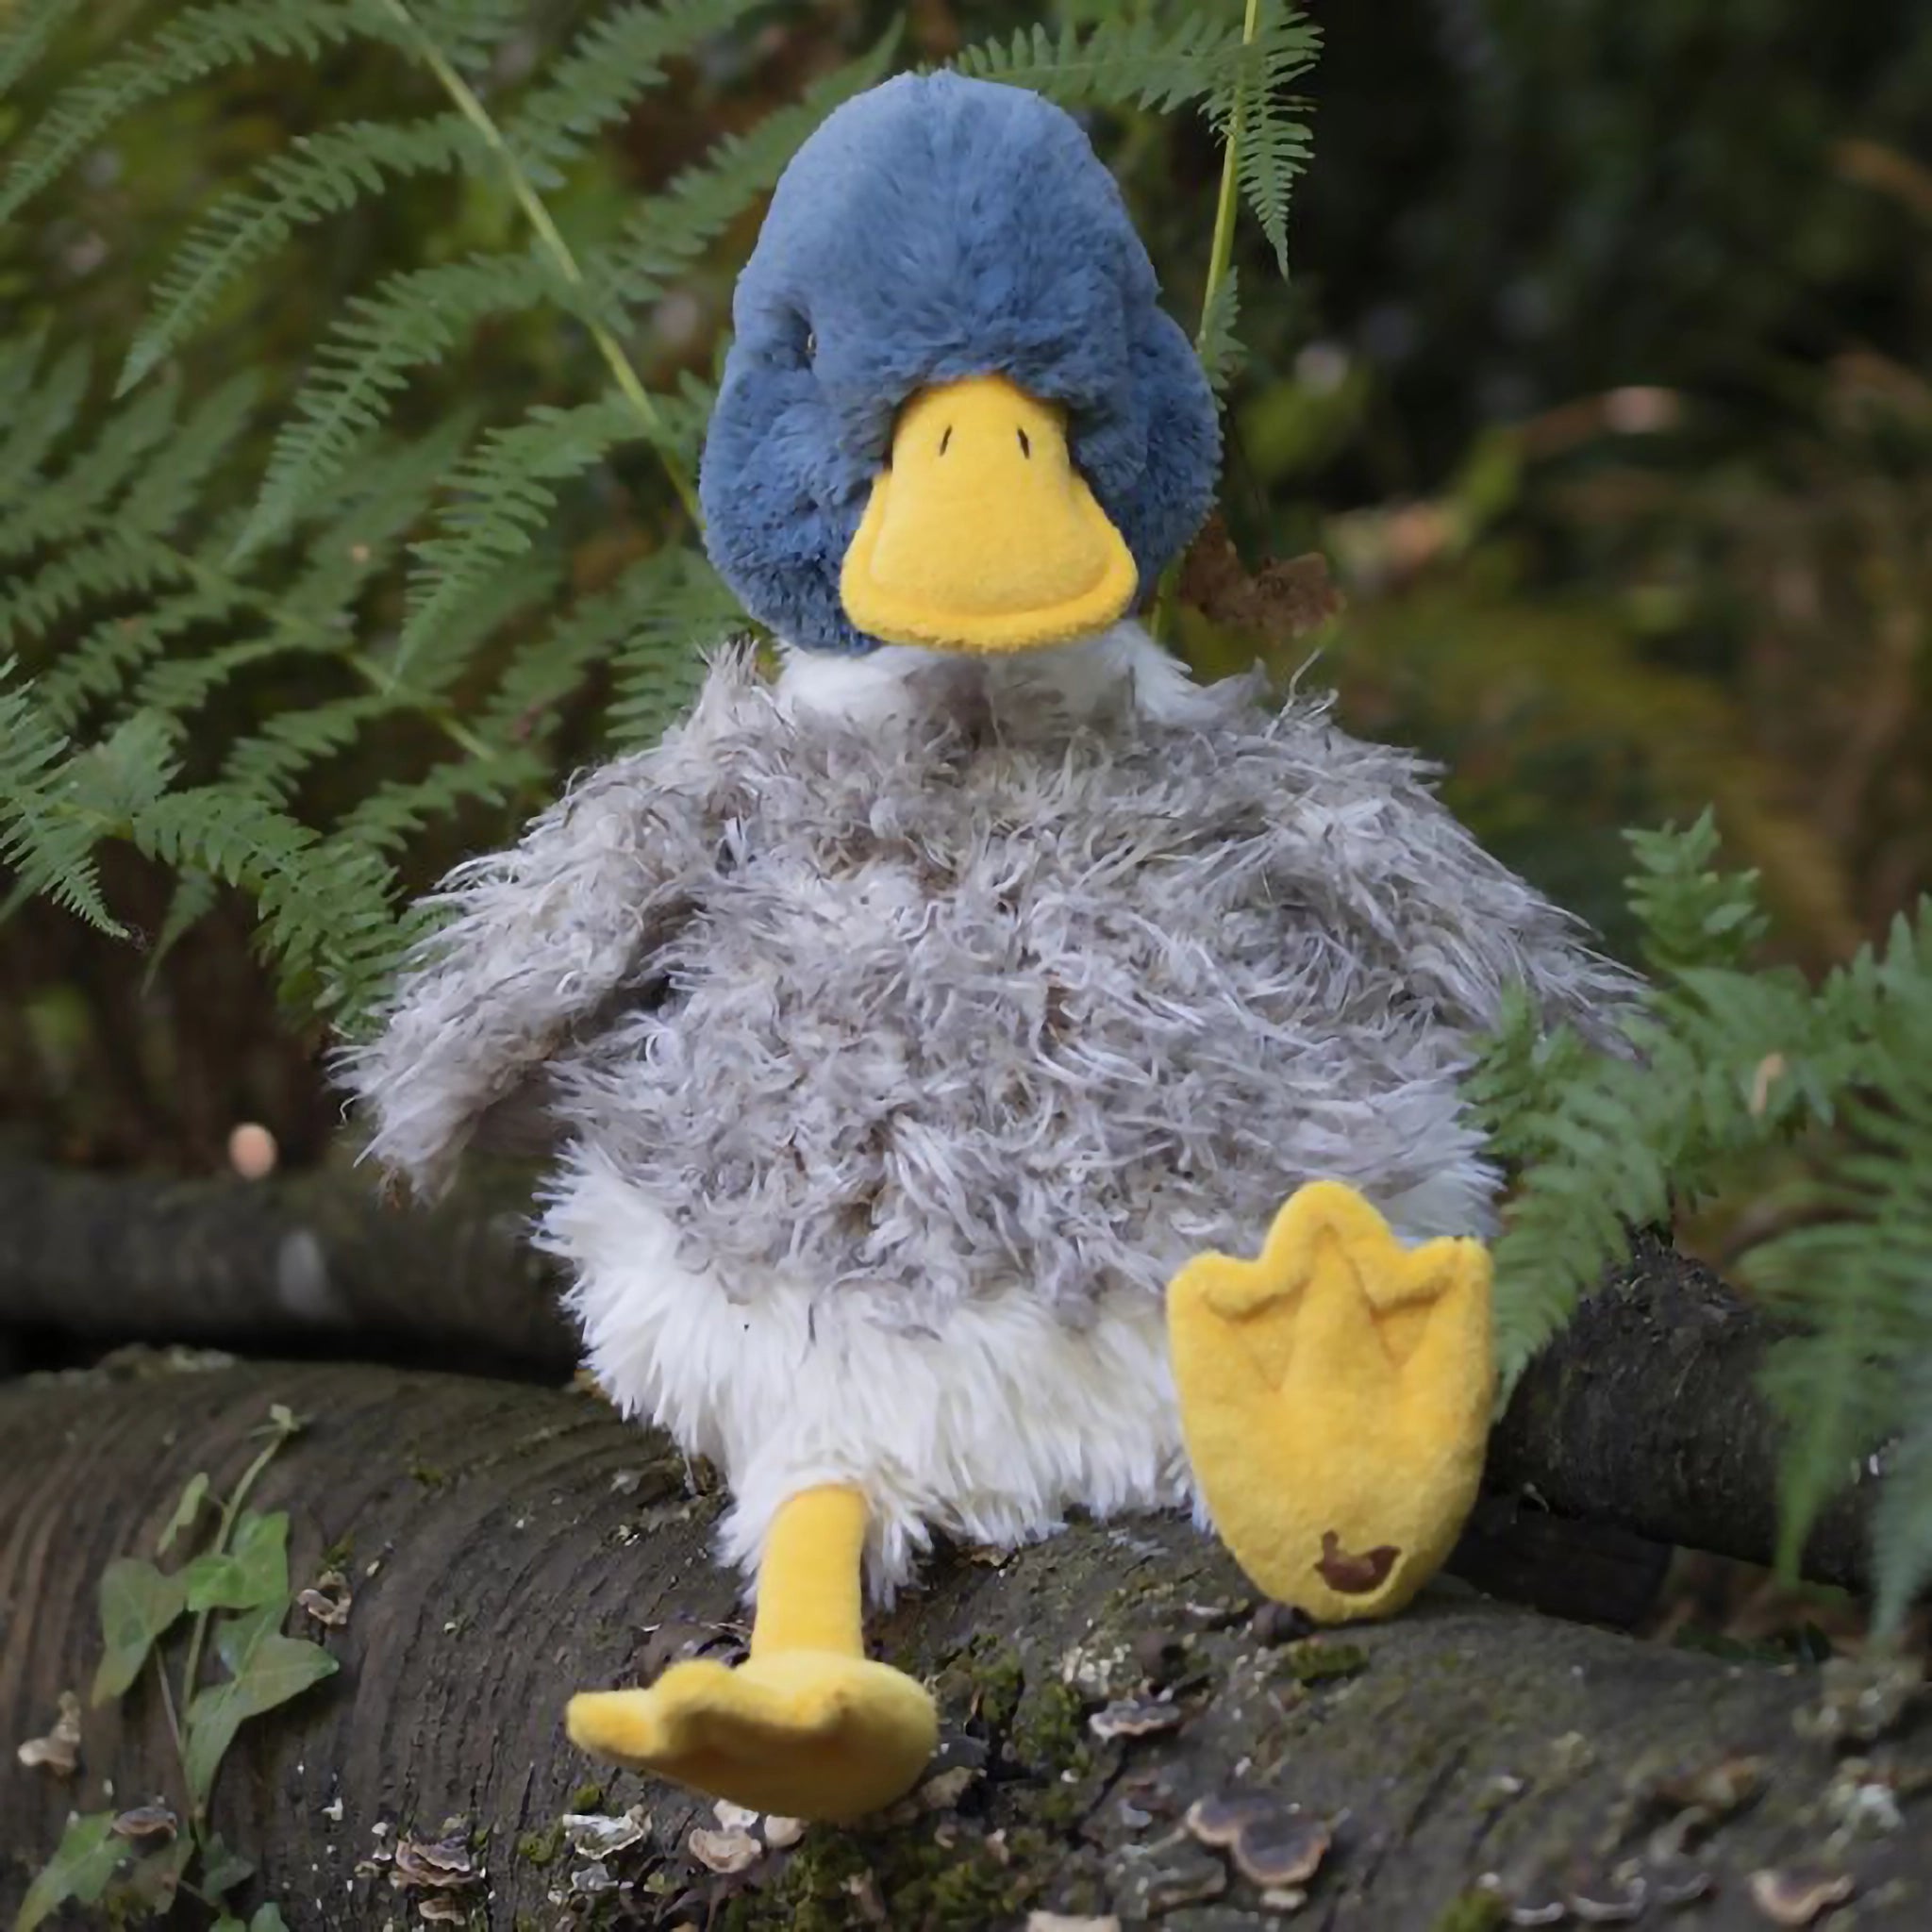 A stuffed duck plush toy with the Wrendale logo embroidered on the bottom of its foot posed on a branch